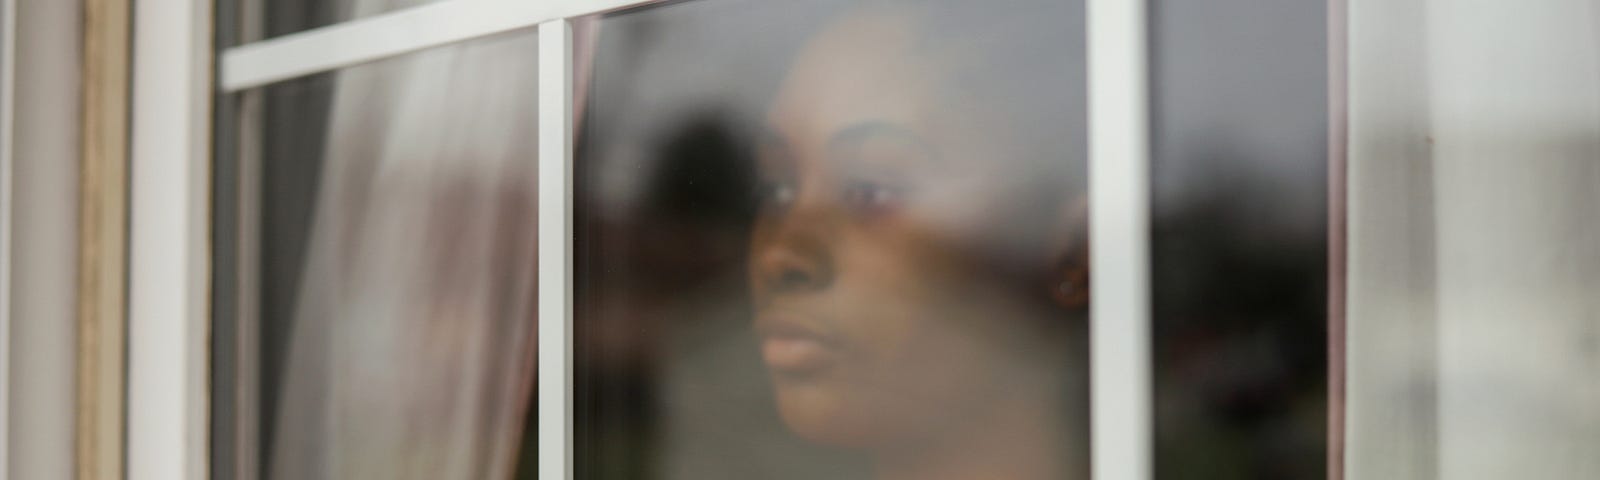 Black woman looking out the window with a forlorn expression.